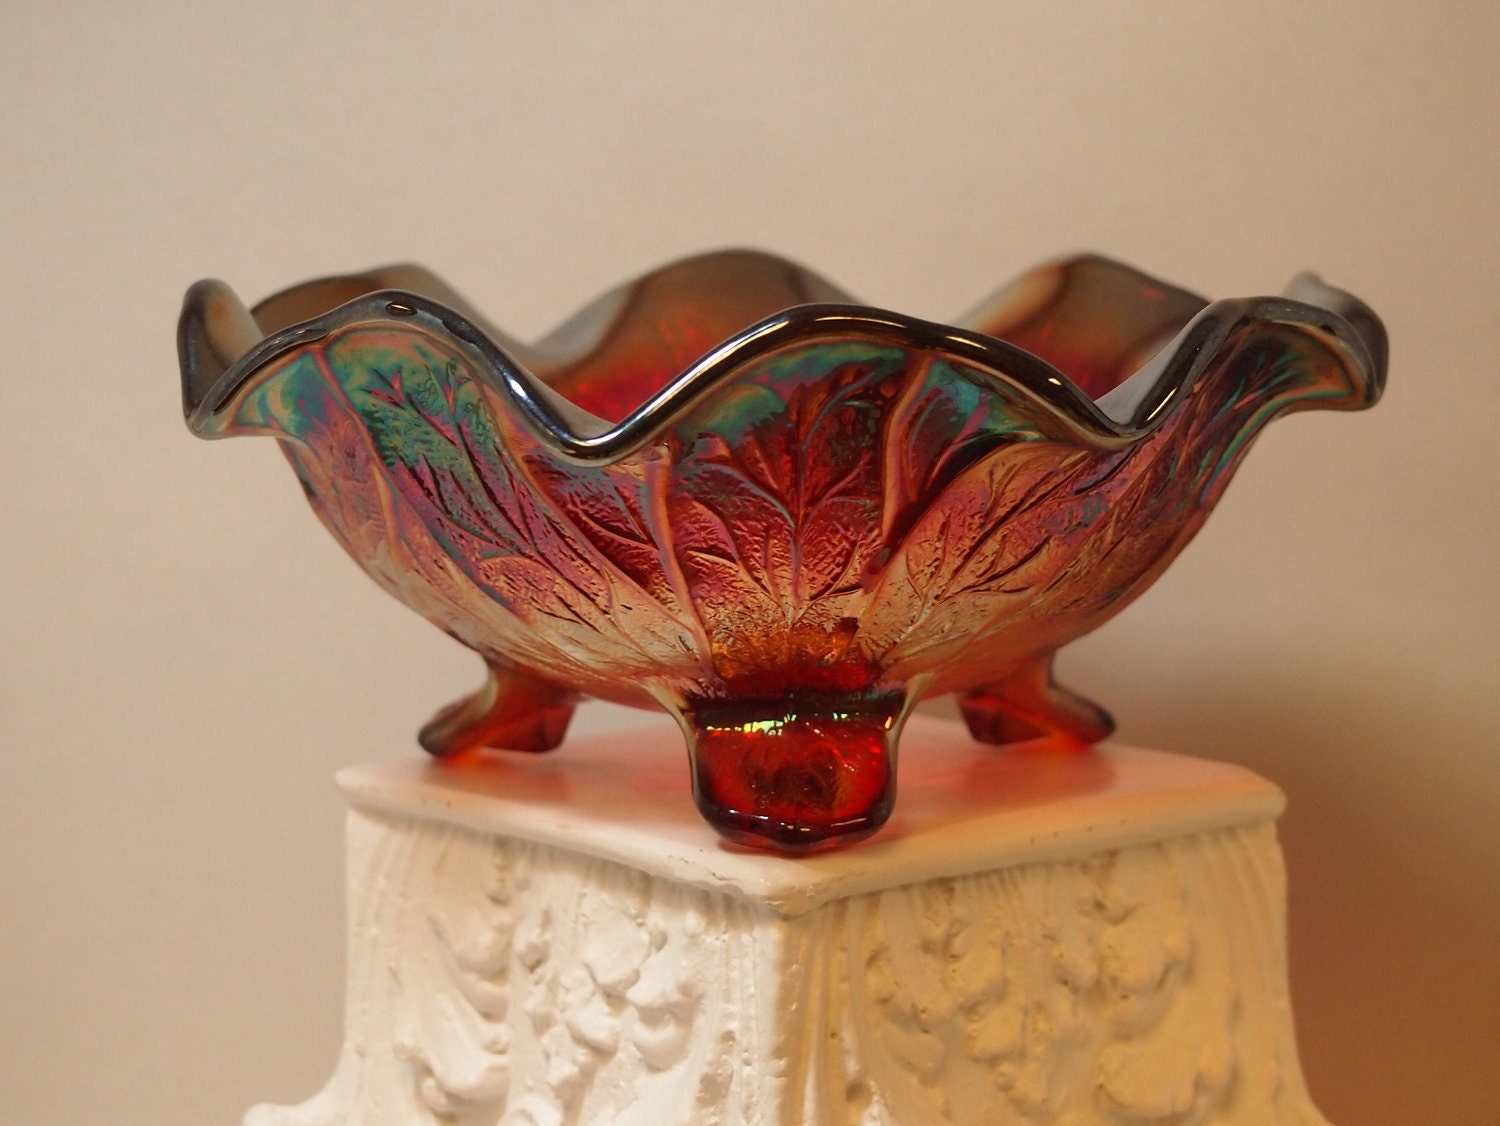 BEAUTIFUL vintage Carnival Glass Footed Ruffled Bowl CHERRY Red with Leaf Pattern by Imperial Glass